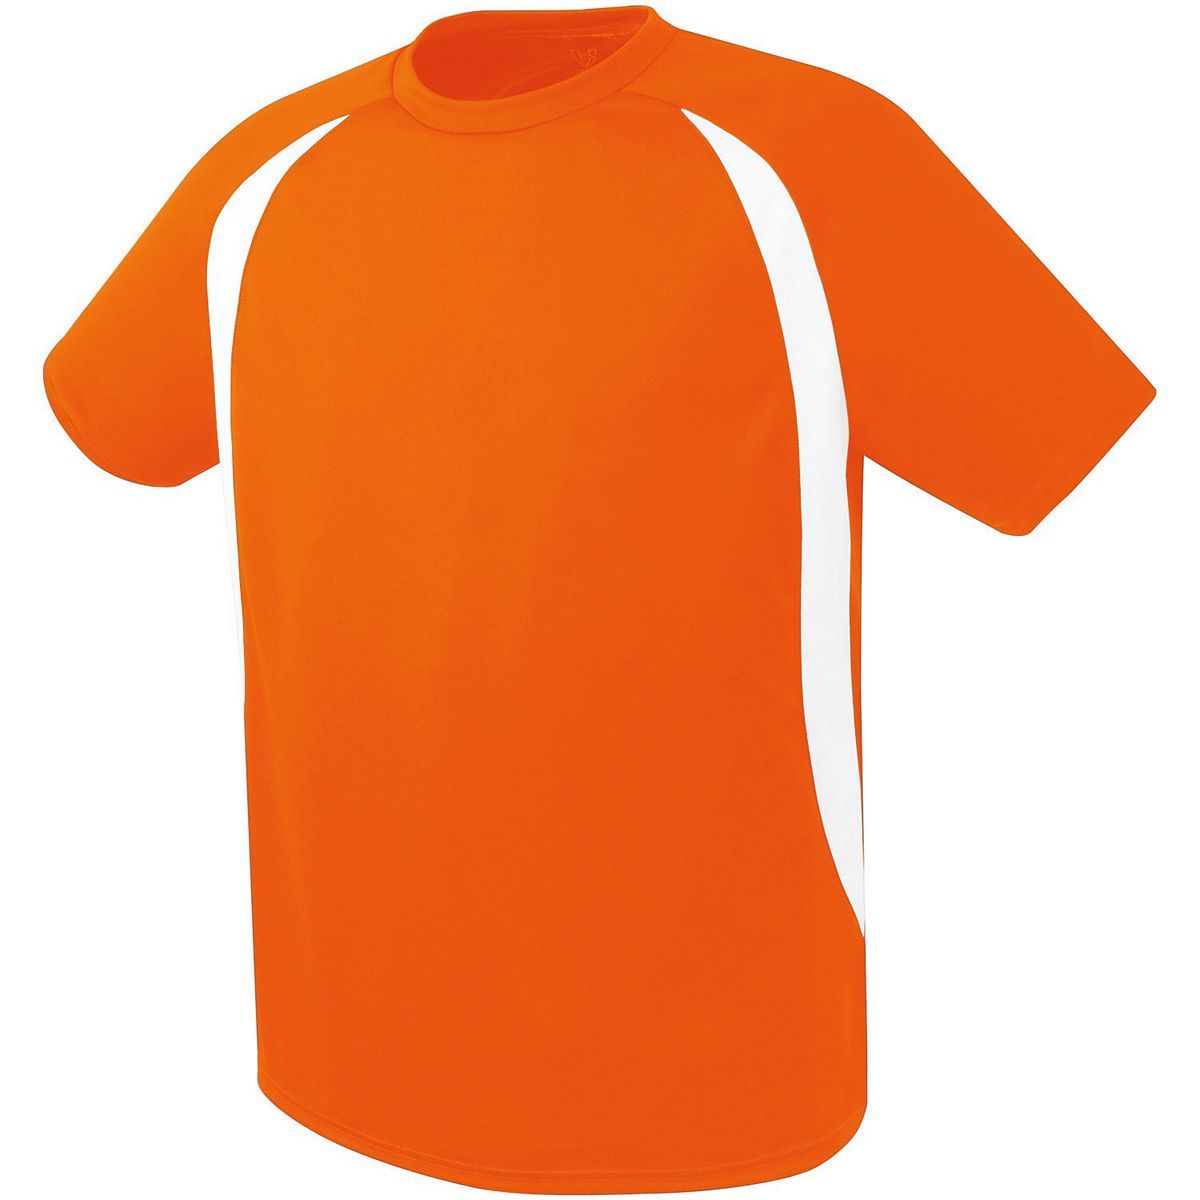 High 5 Liberty  Soccer Jersey in Orange/White  -Part of the Adult, Adult-Jersey, High5-Products, Soccer, Shirts, All-Sports-1 product lines at KanaleyCreations.com